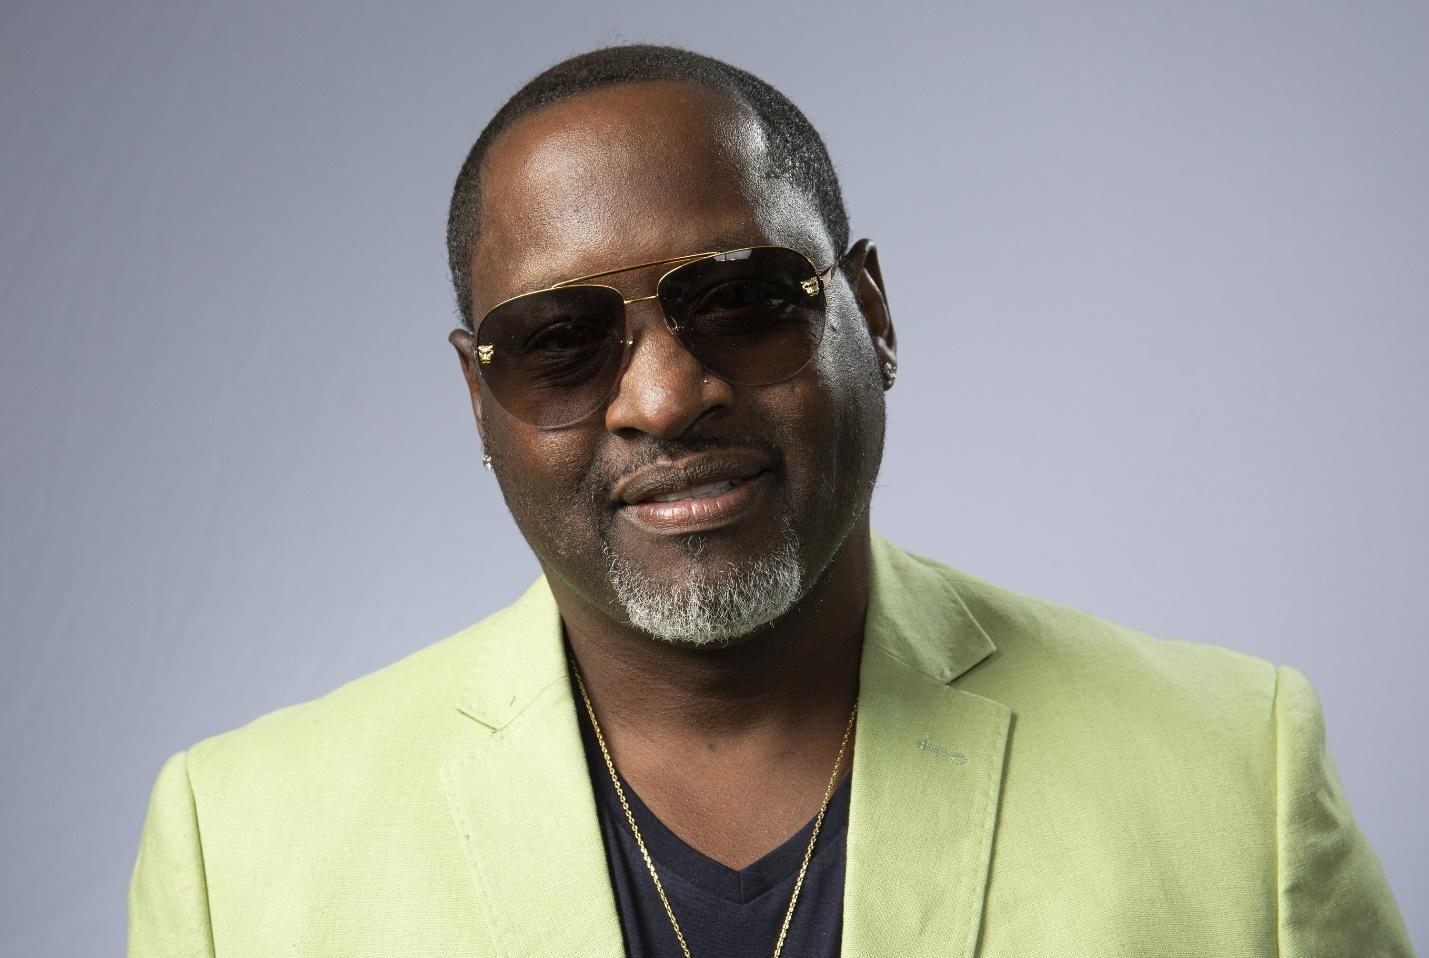 Johnny Gill is now the big Johnny.